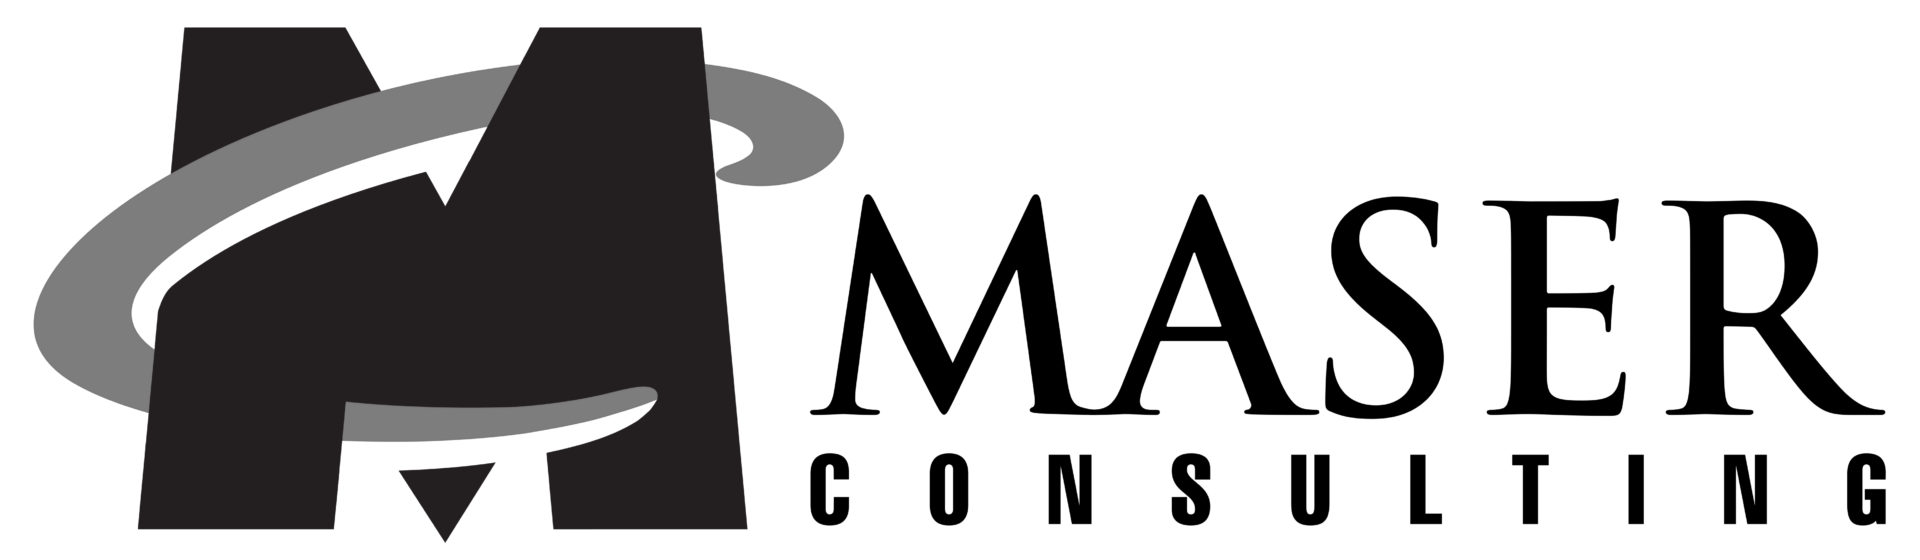 Maser Consulting